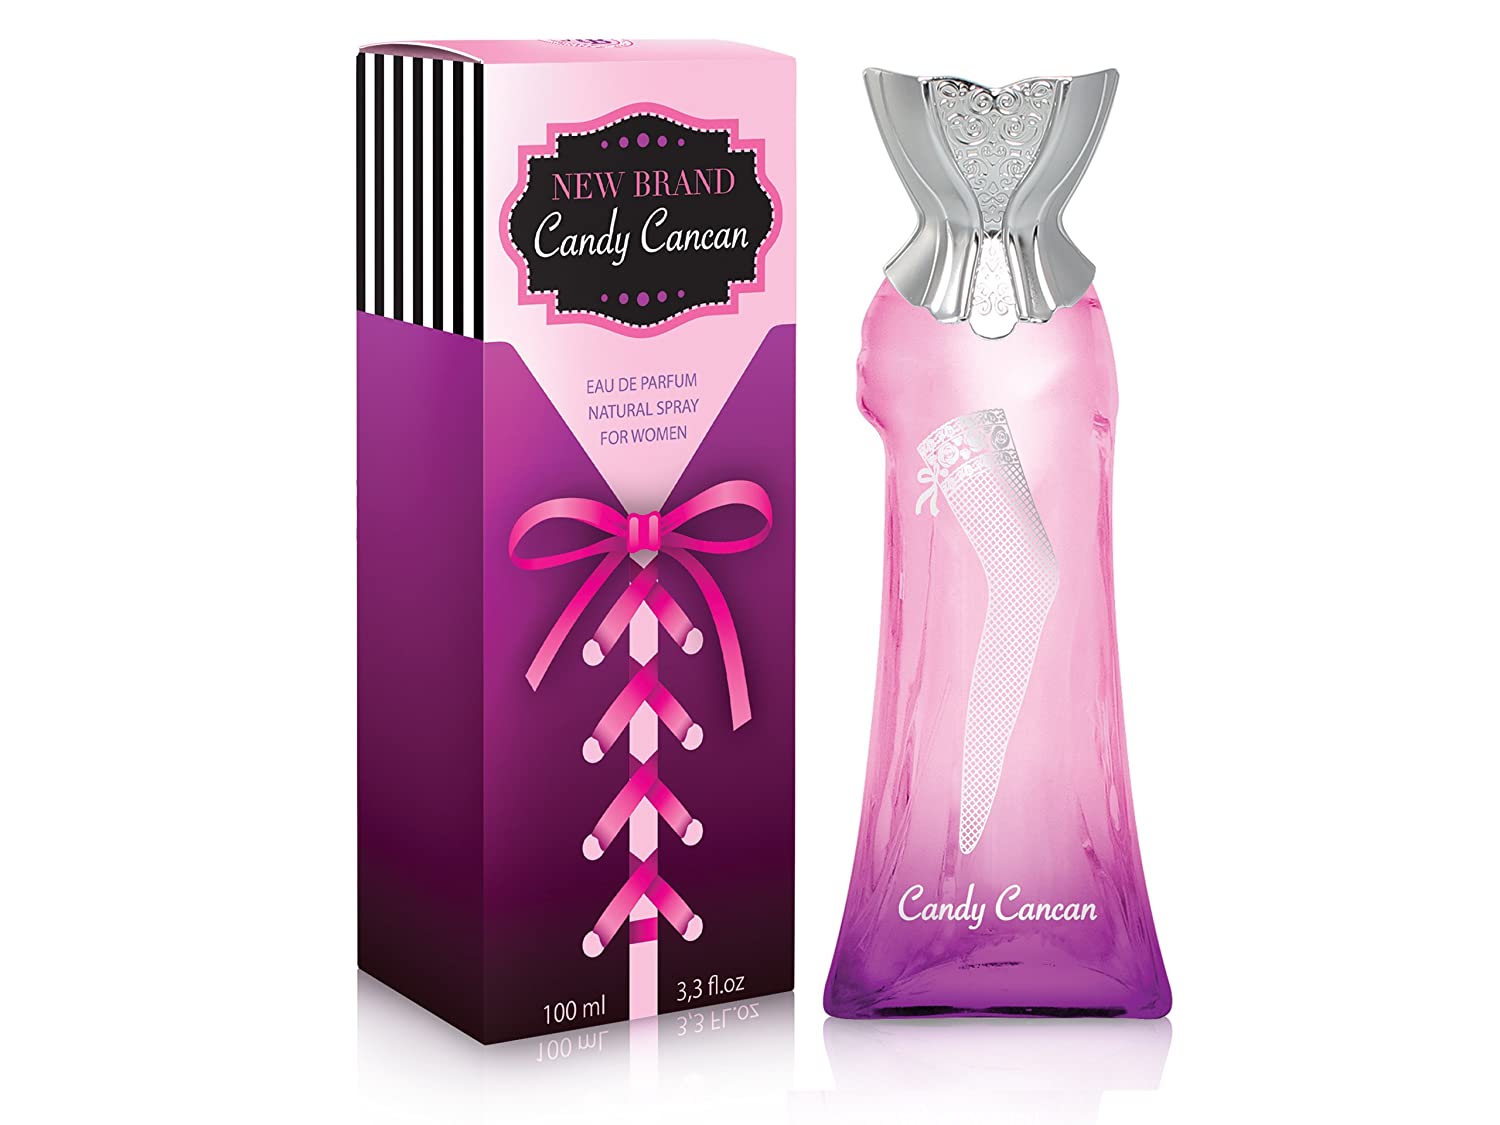 perfume can can mujer edp 100 ml